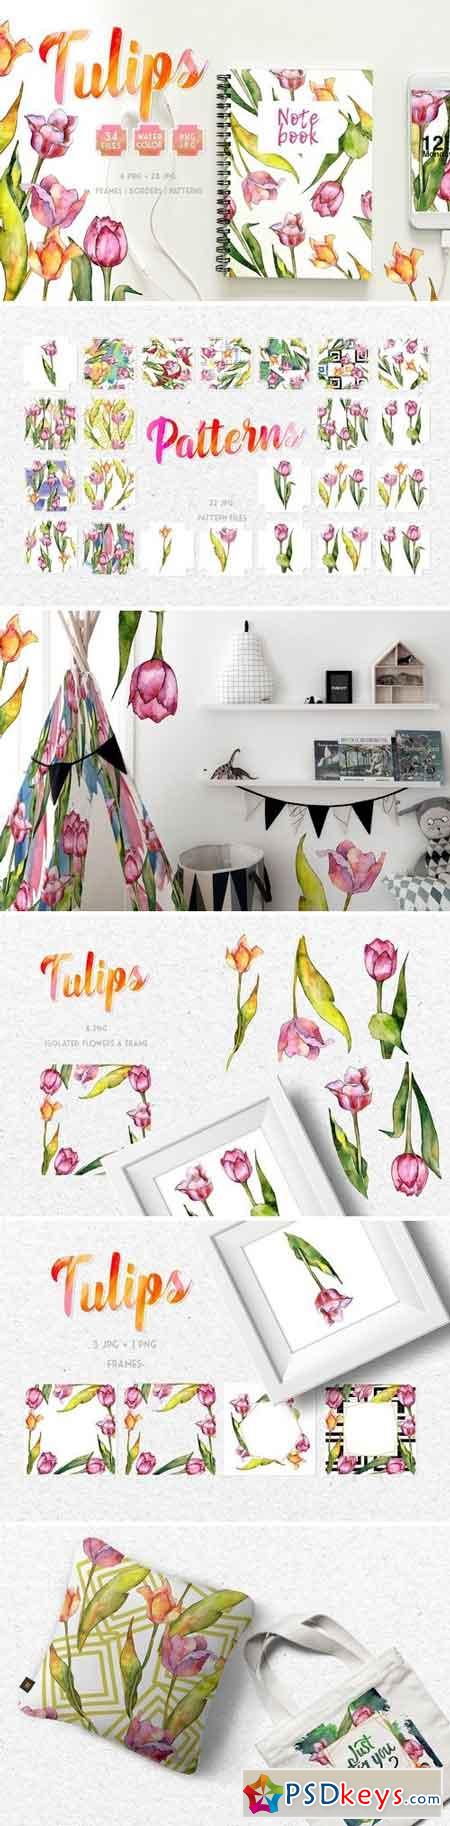 Tulips for Love Watercolor png 3357911